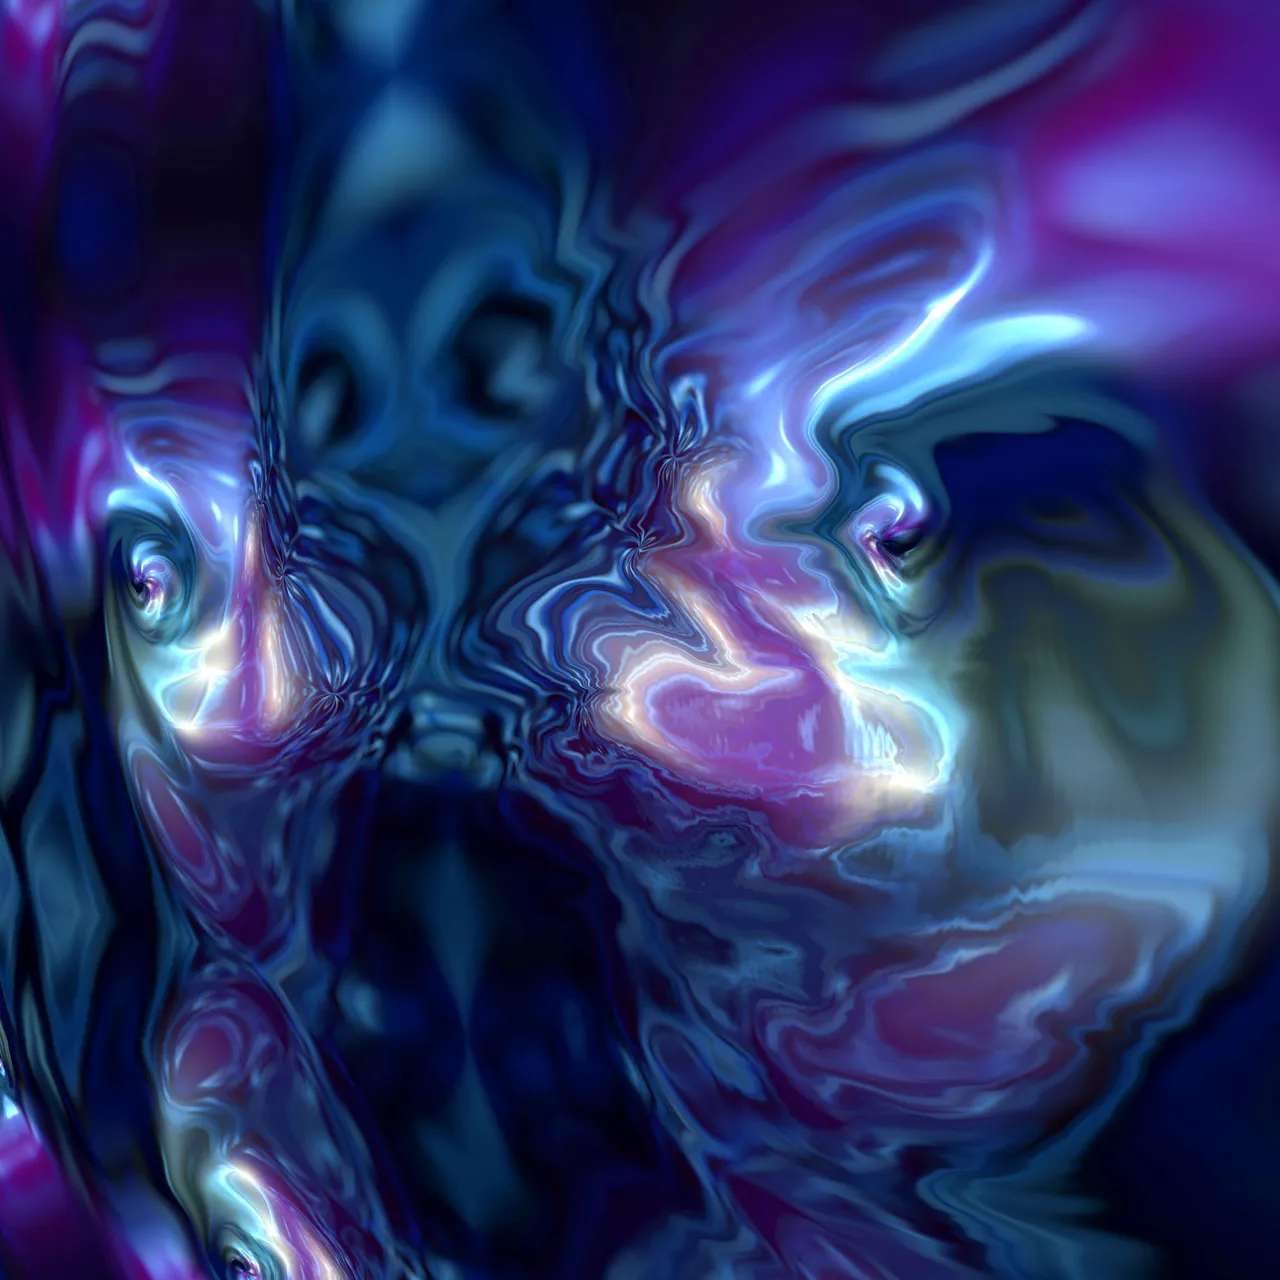 image3A271106_chroma2_mirror3.png